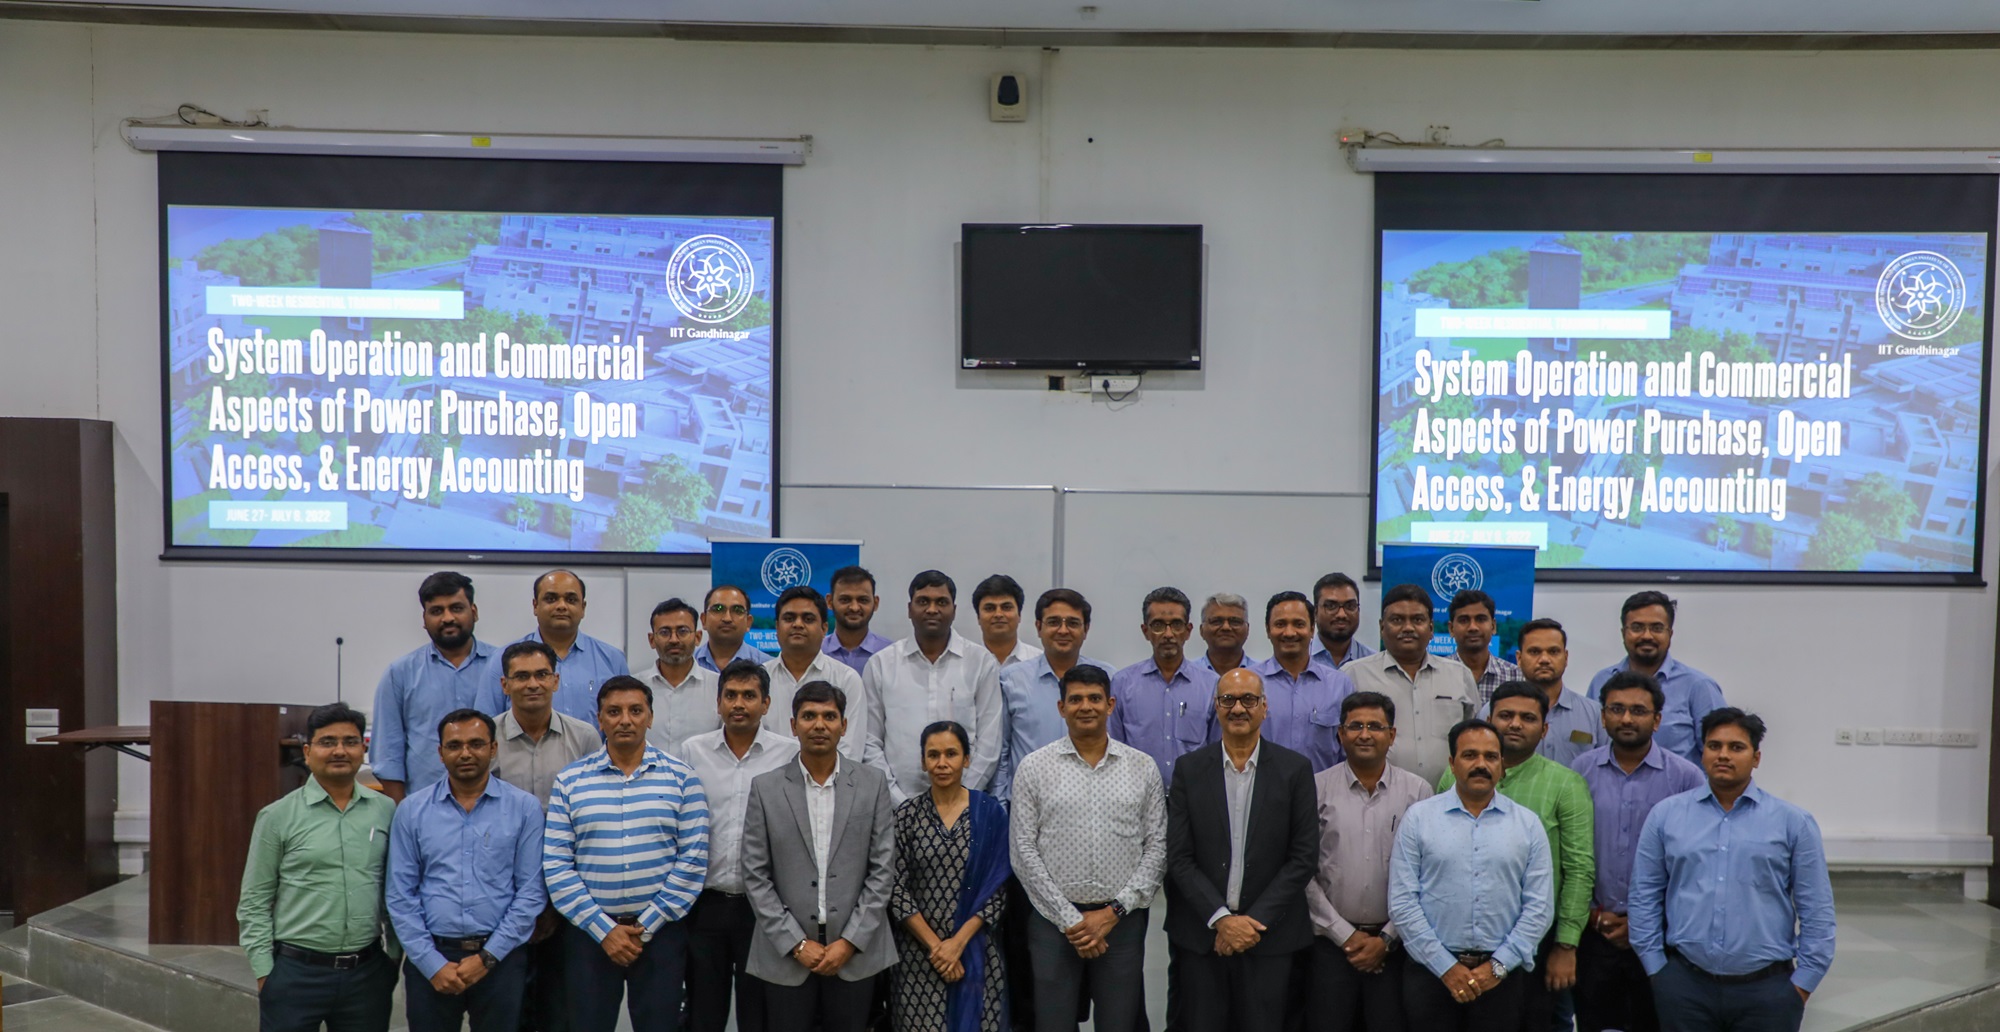 Training program “System Operation and Commercial Aspects of Power Purchase, Open Access, & Energy Accounting” for the officers of Gujarat Urja Vikas Nigam Ltd. (GUVNL) and its subsidiary companies